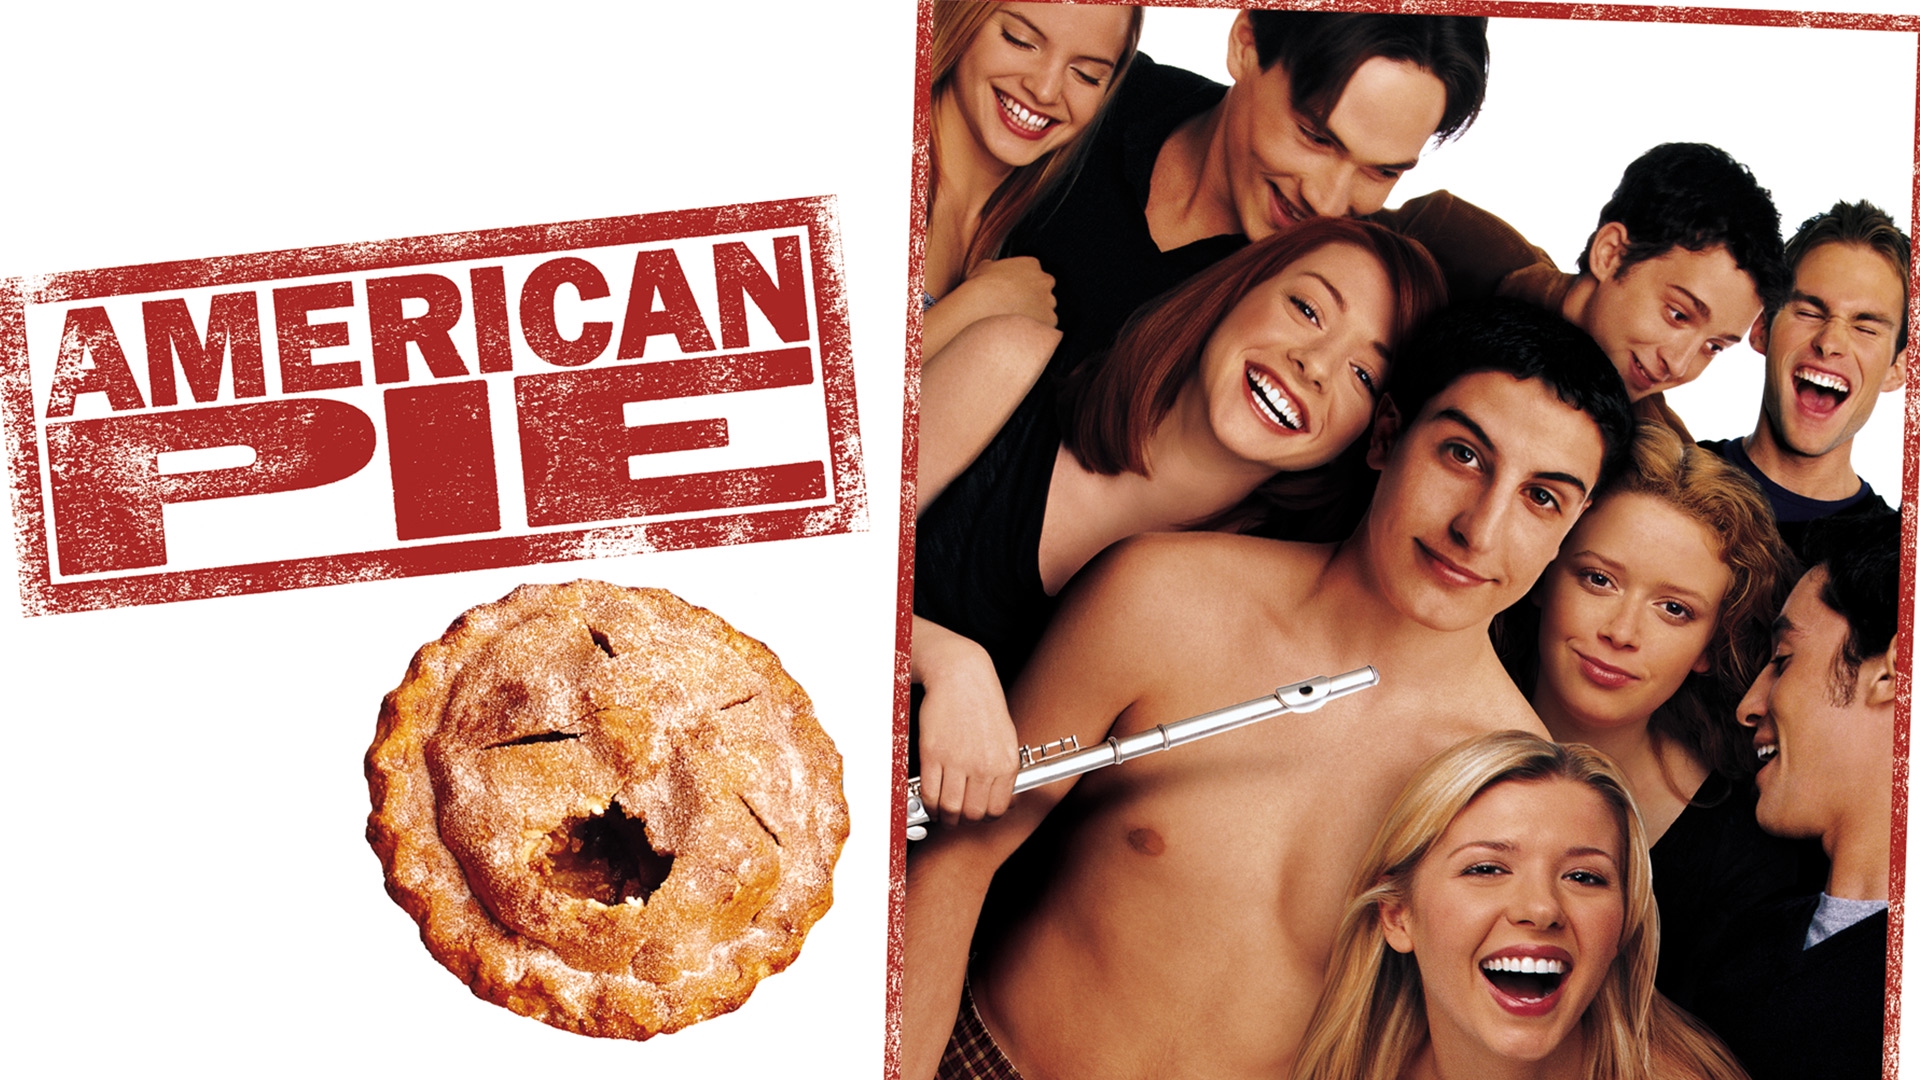 cathy saucedo recommends american pie movie online free pic